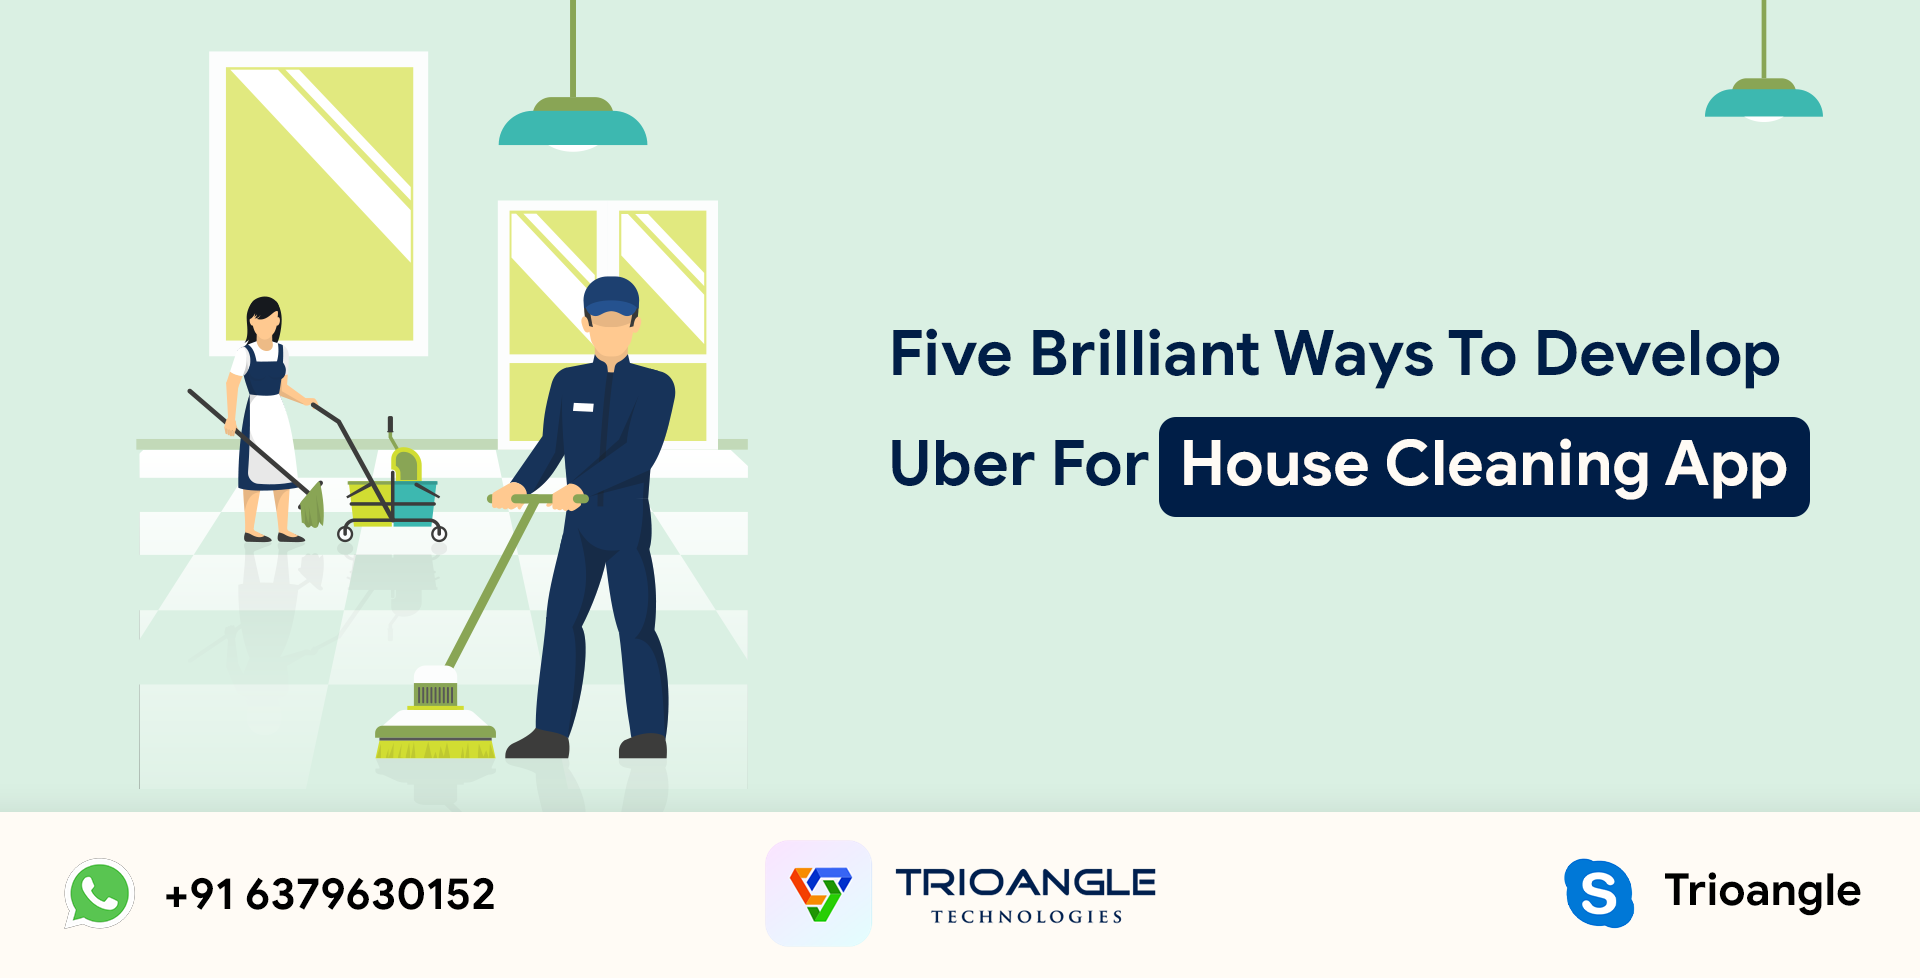 Article about Five Brilliant Ways To Develop Uber For House Cleaning App